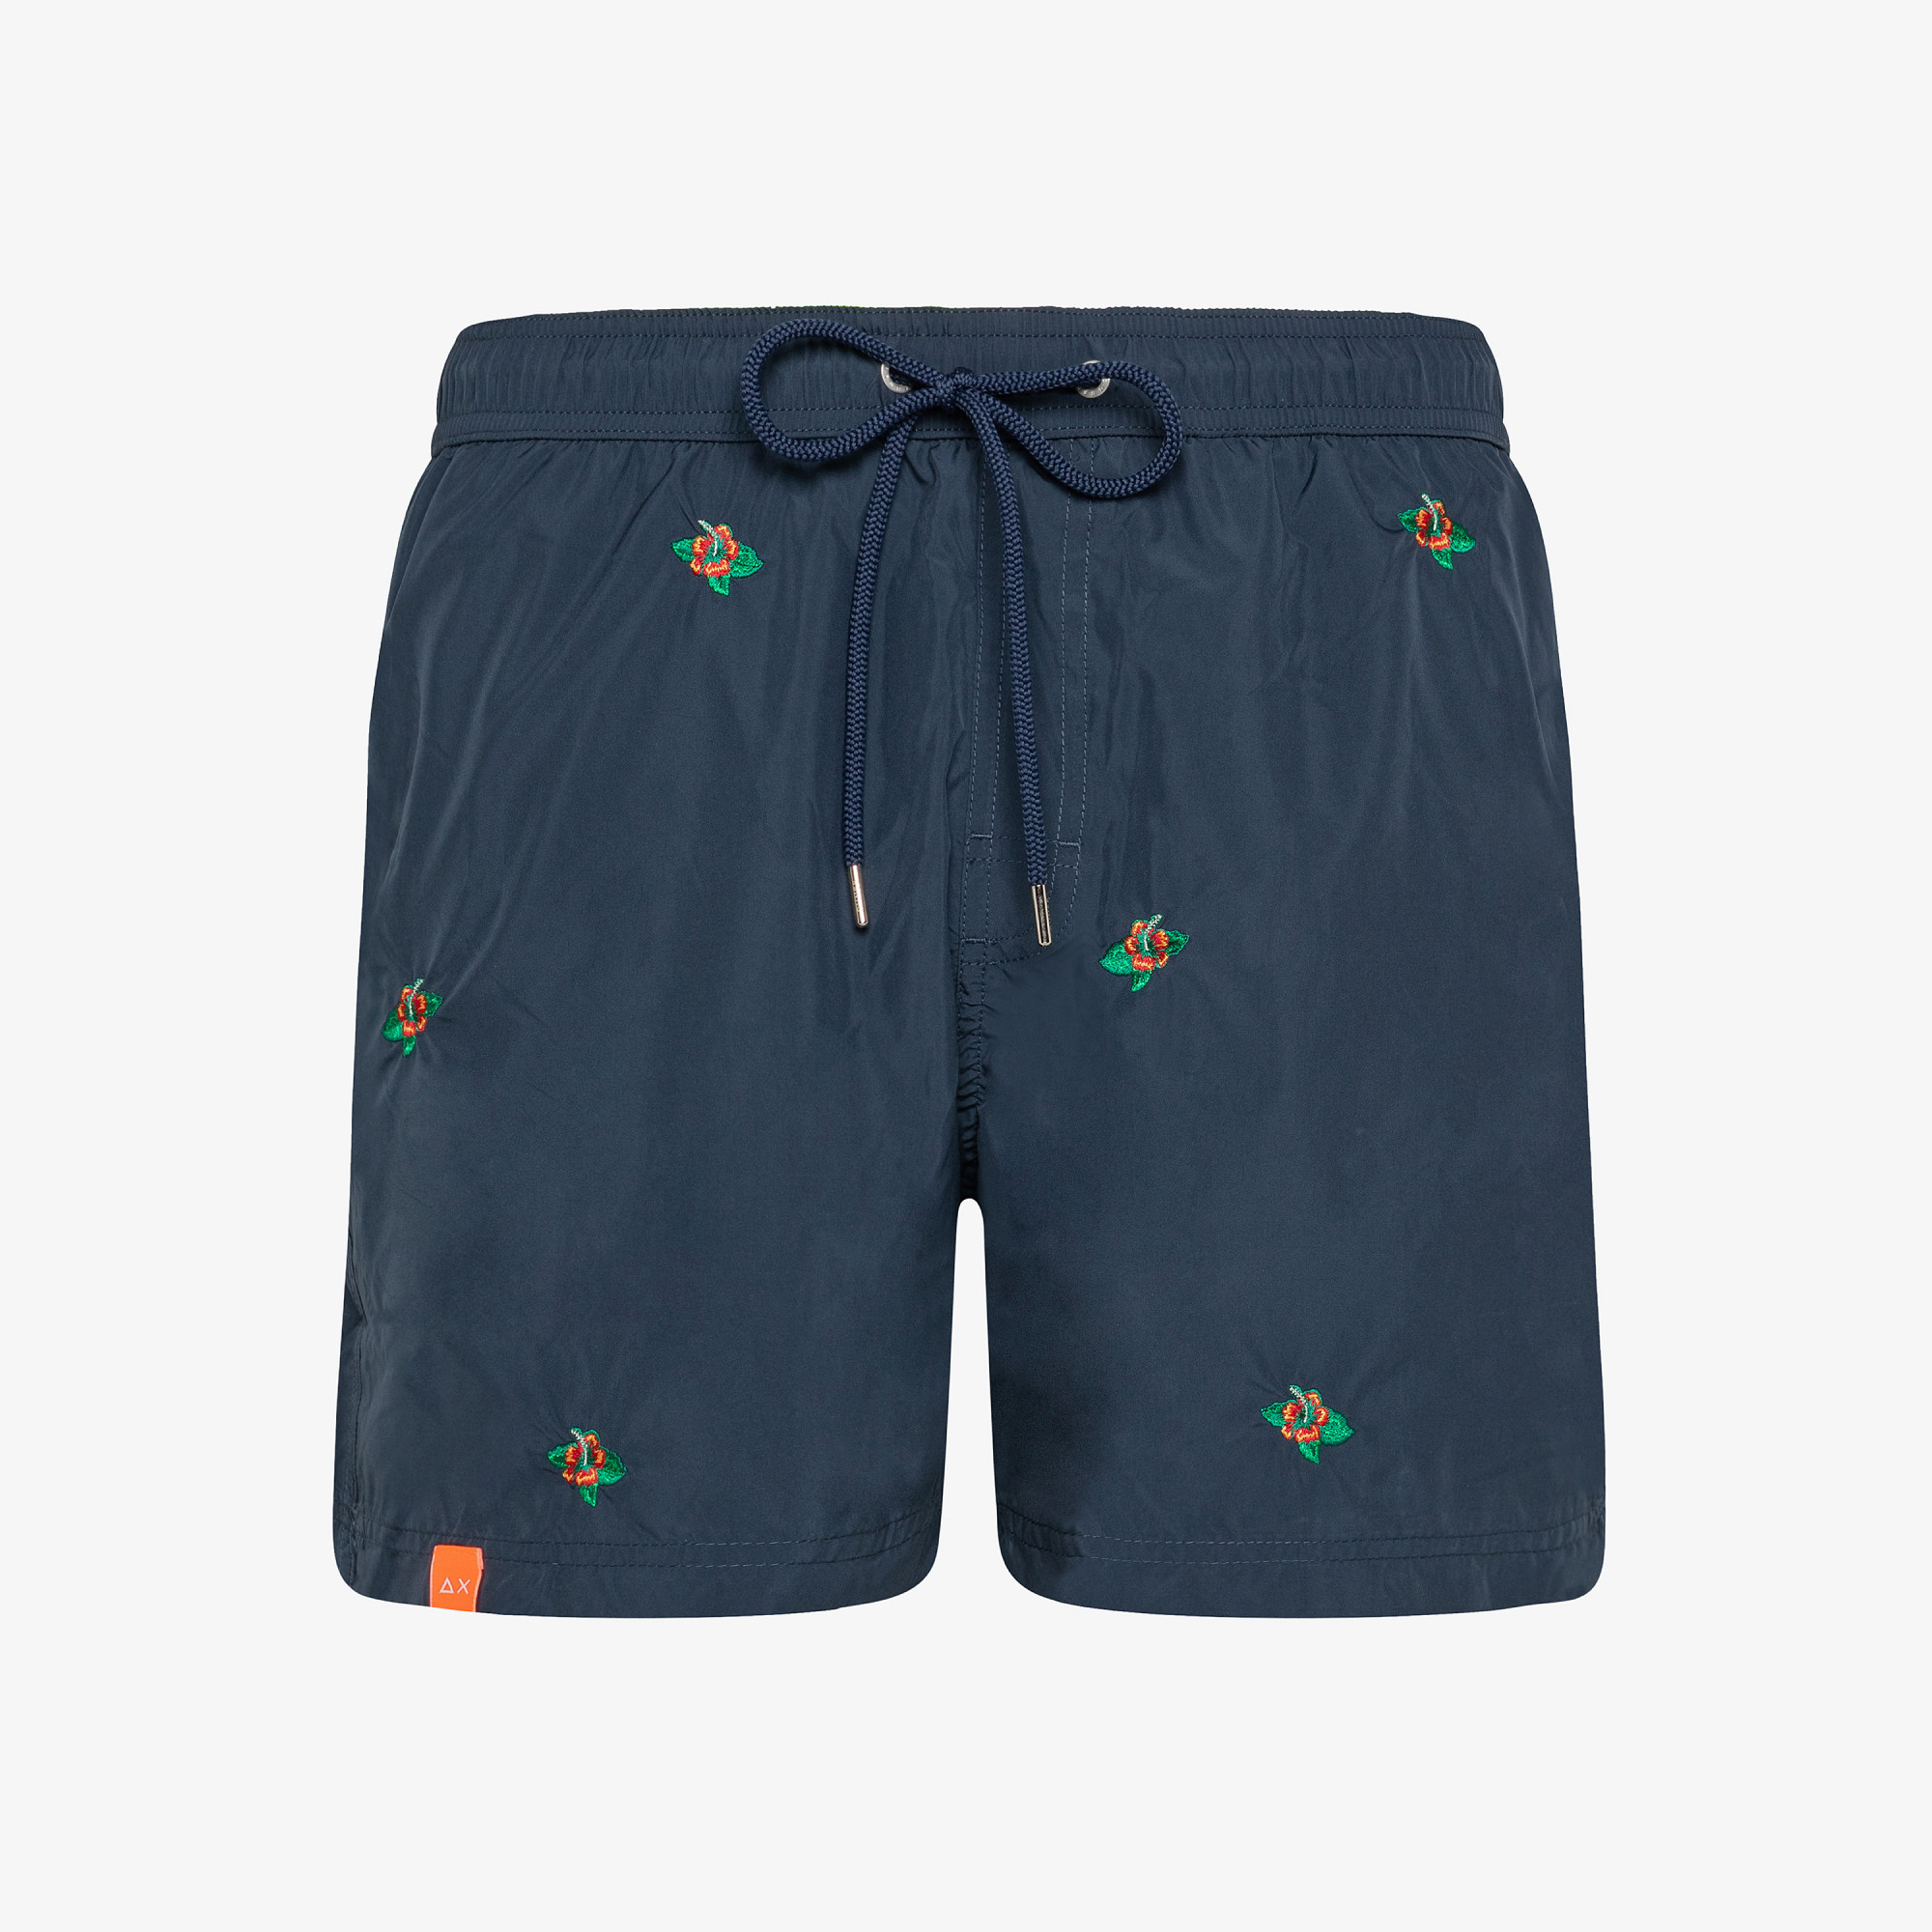 SWIM PANT EMBRODERY NAVY BLUE